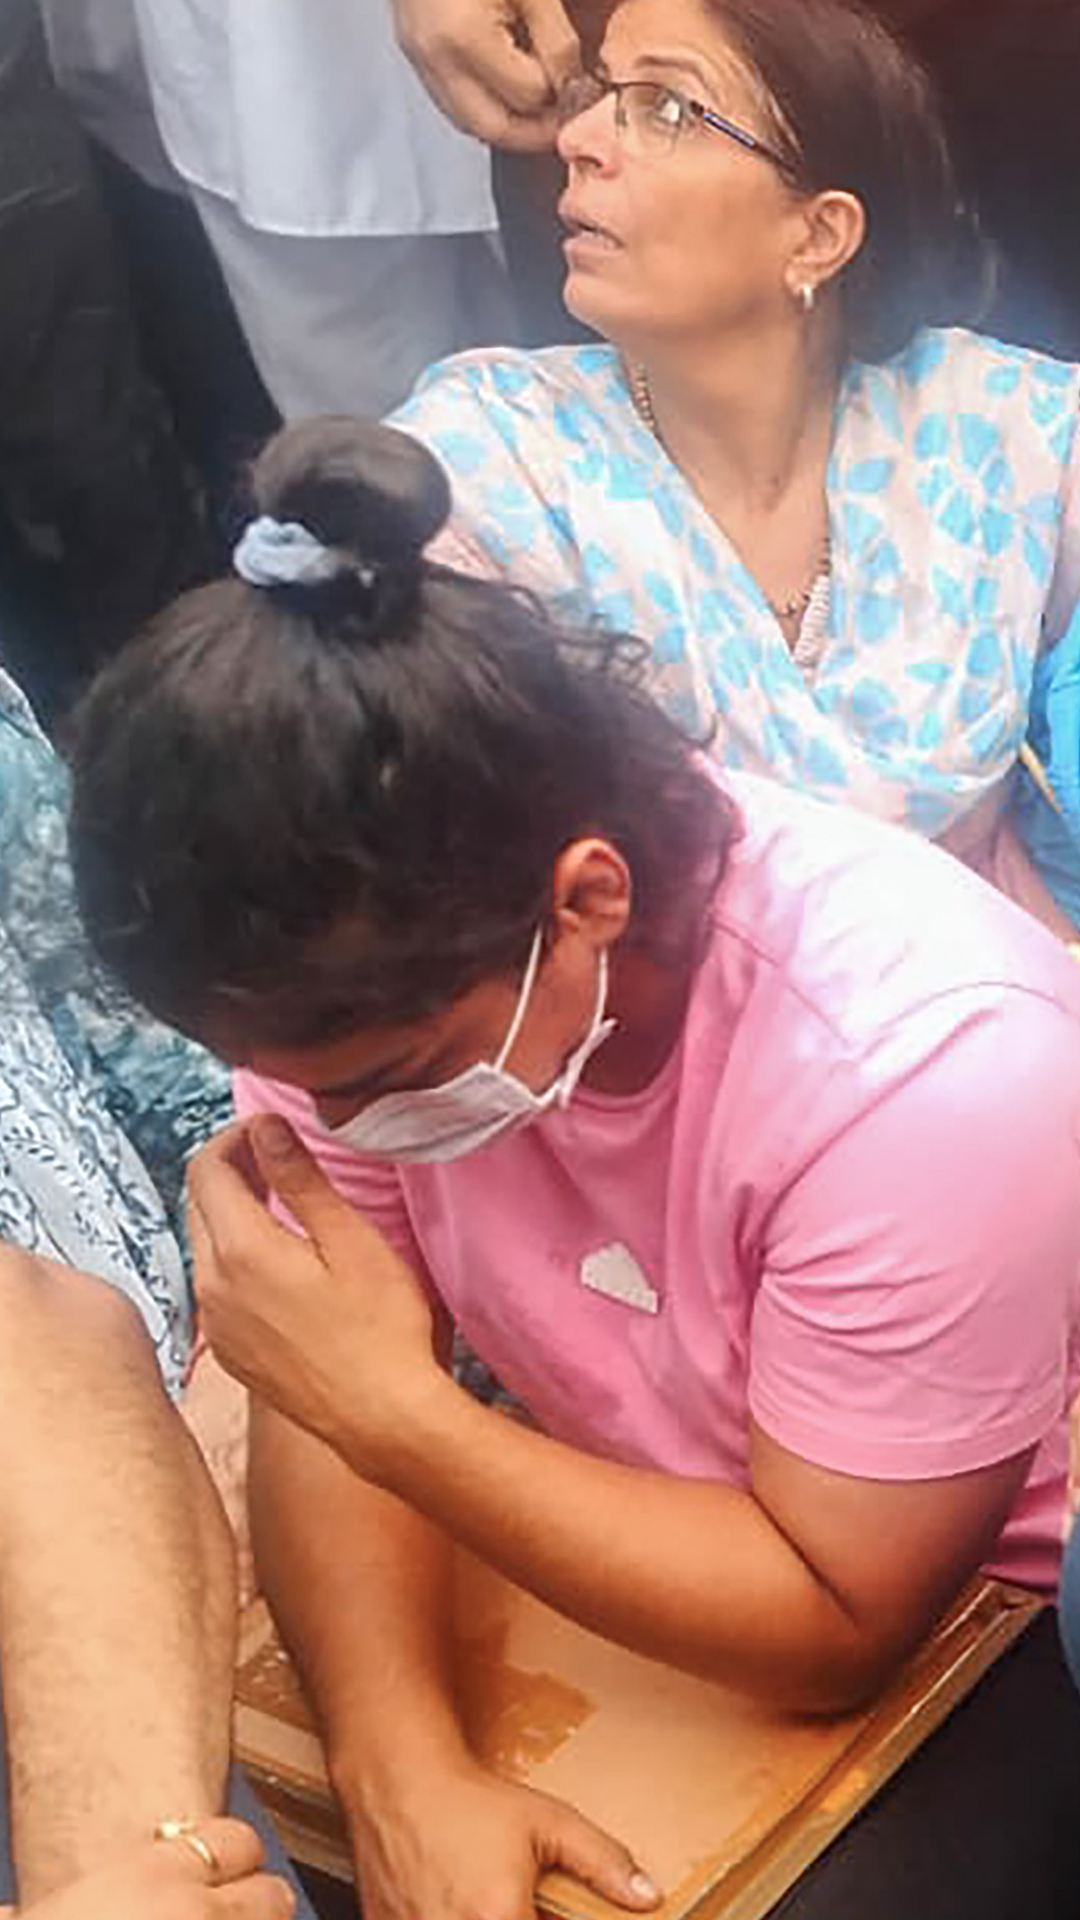 Protesting wrestlers Vinesh Phogat, Sangeeta Phogat, others arrive at Har ki Pauri ghat, in Haridwar, to immerse their medals as mark of protest against WFI Chief Brij Bhushan Sharan Singh 